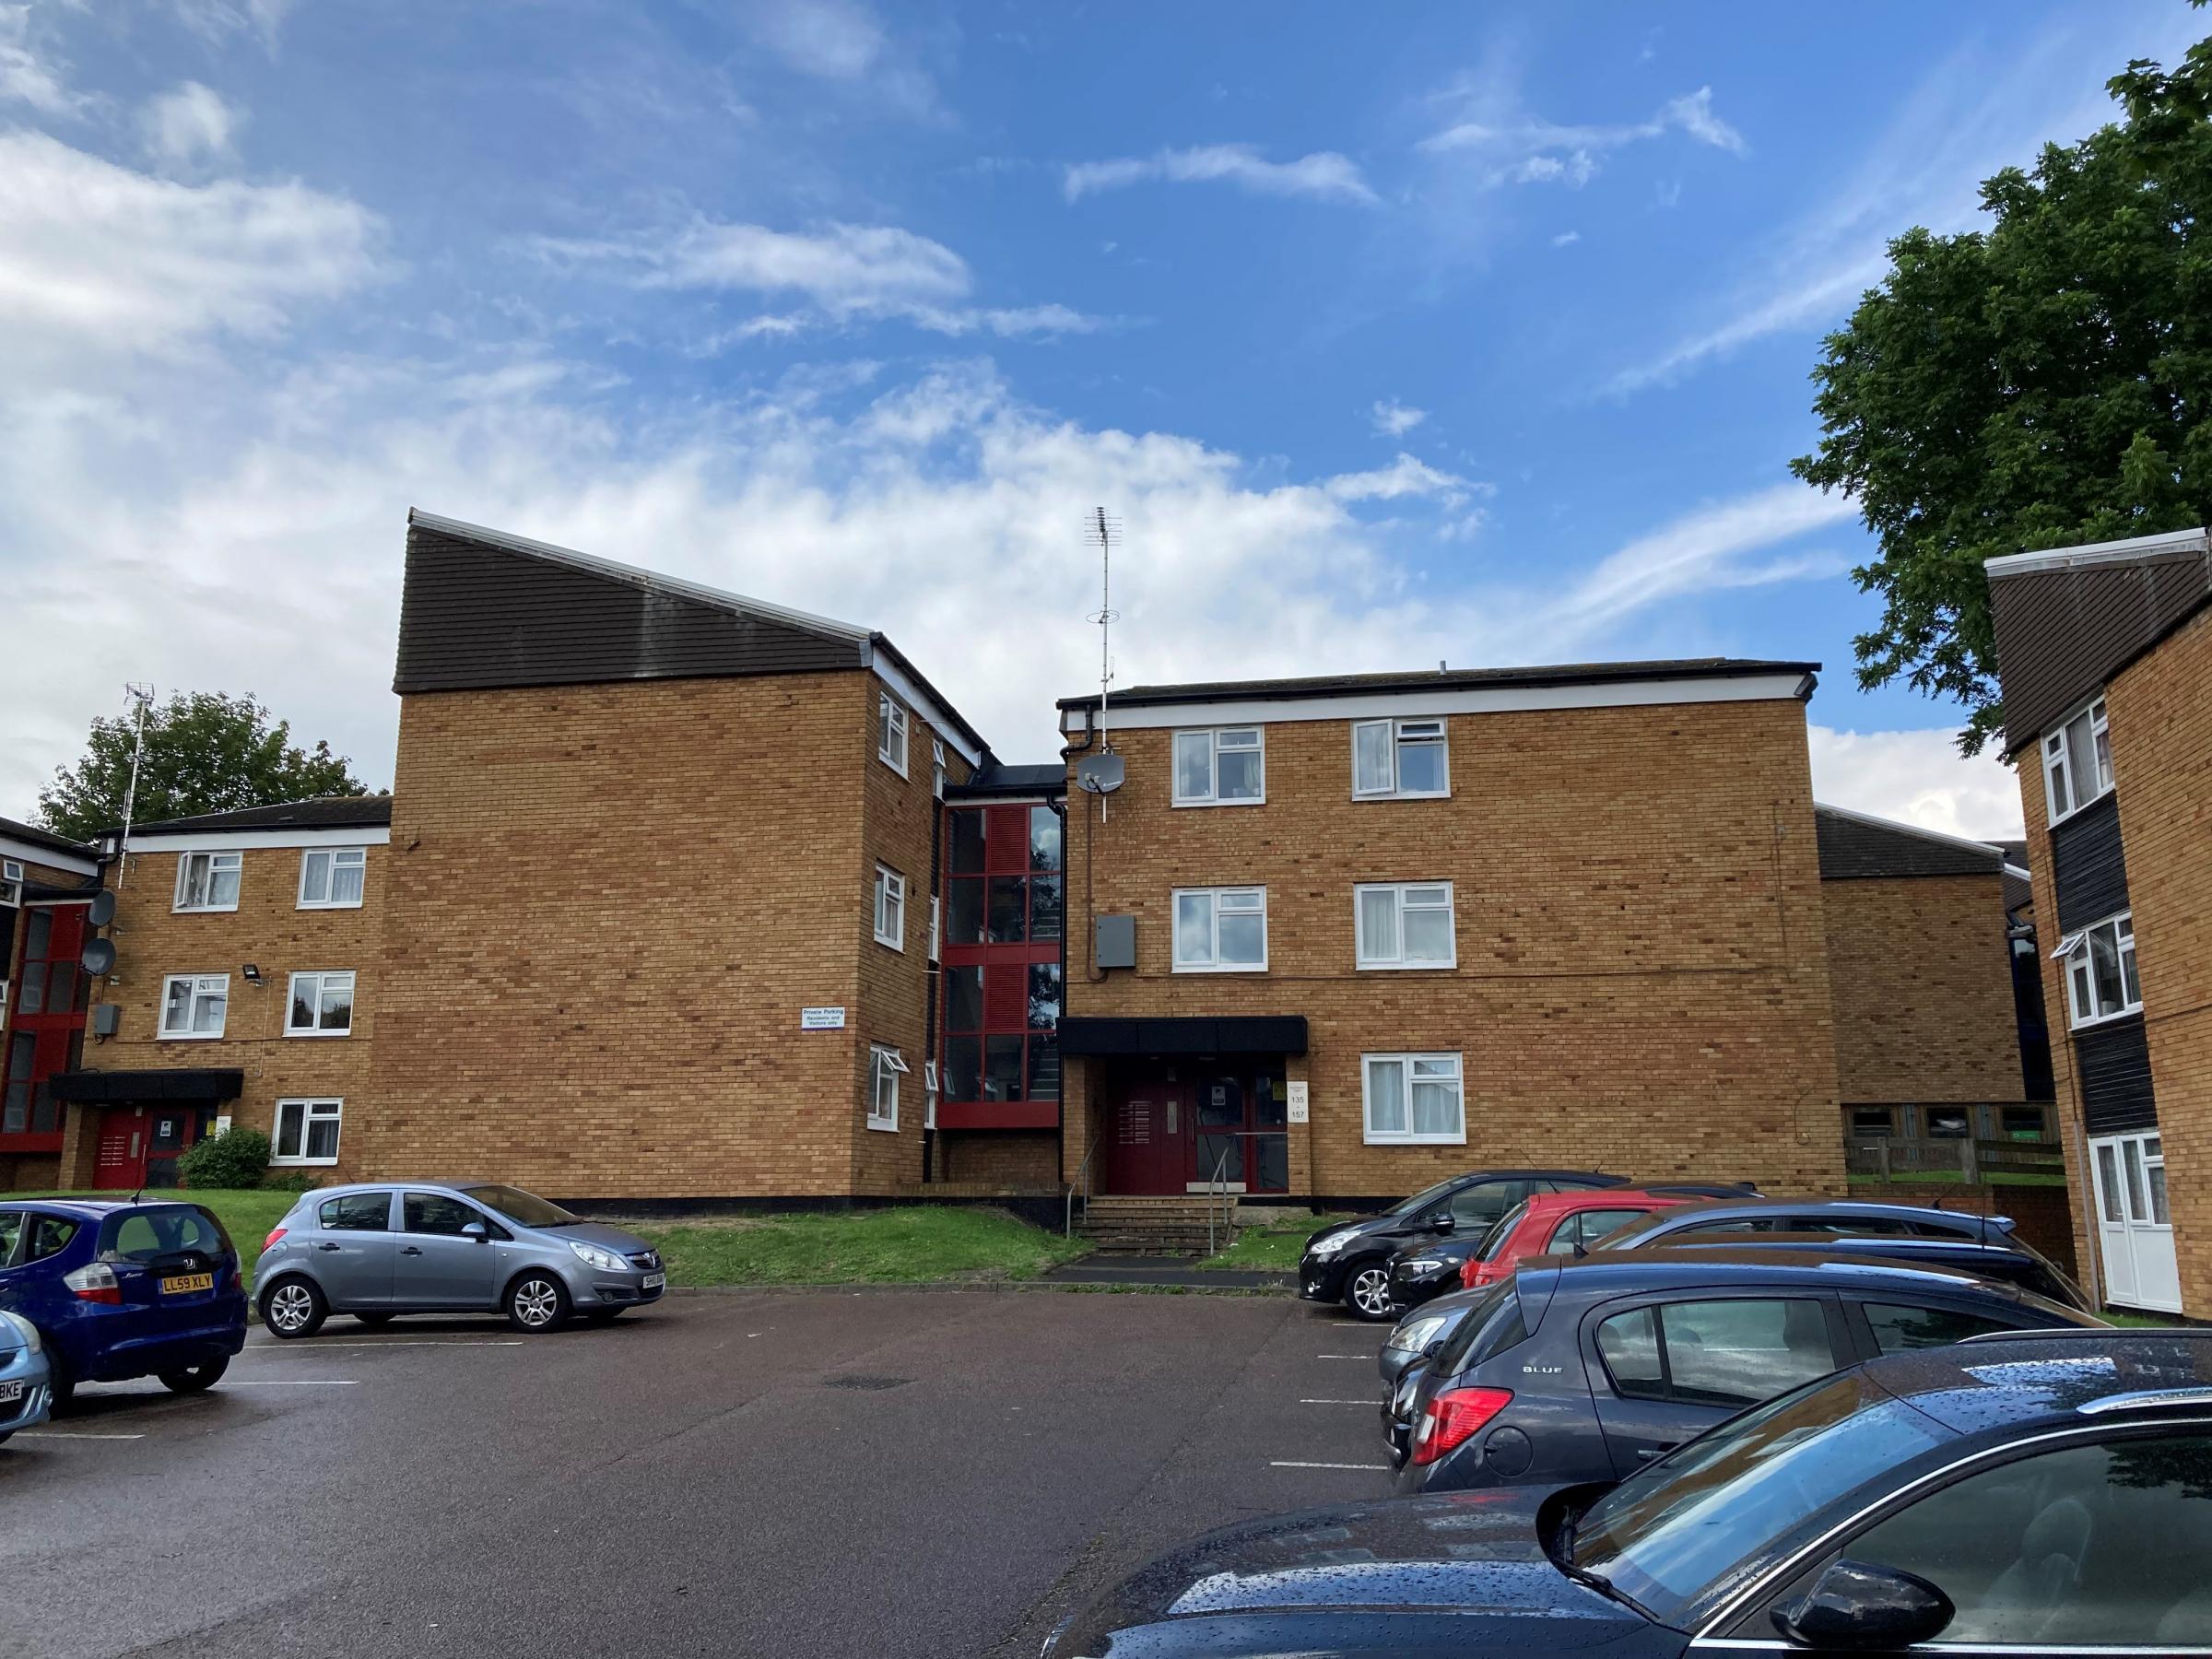 Harrow Council has approved plans to build an extra 48 flats on top of existing buildings in Edgwares Berridge estate